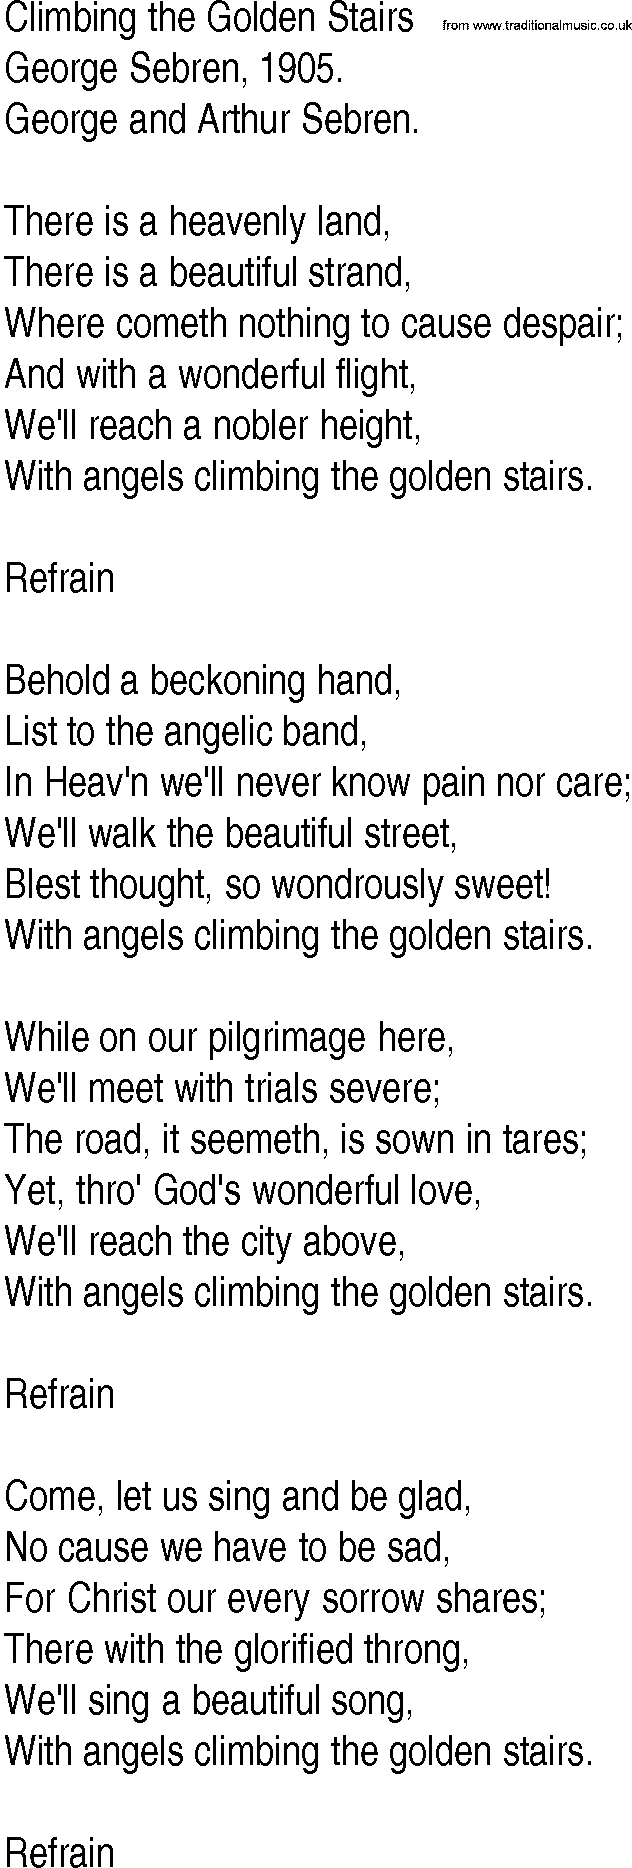 Hymn and Gospel Song: Climbing the Golden Stairs by George Sebren lyrics